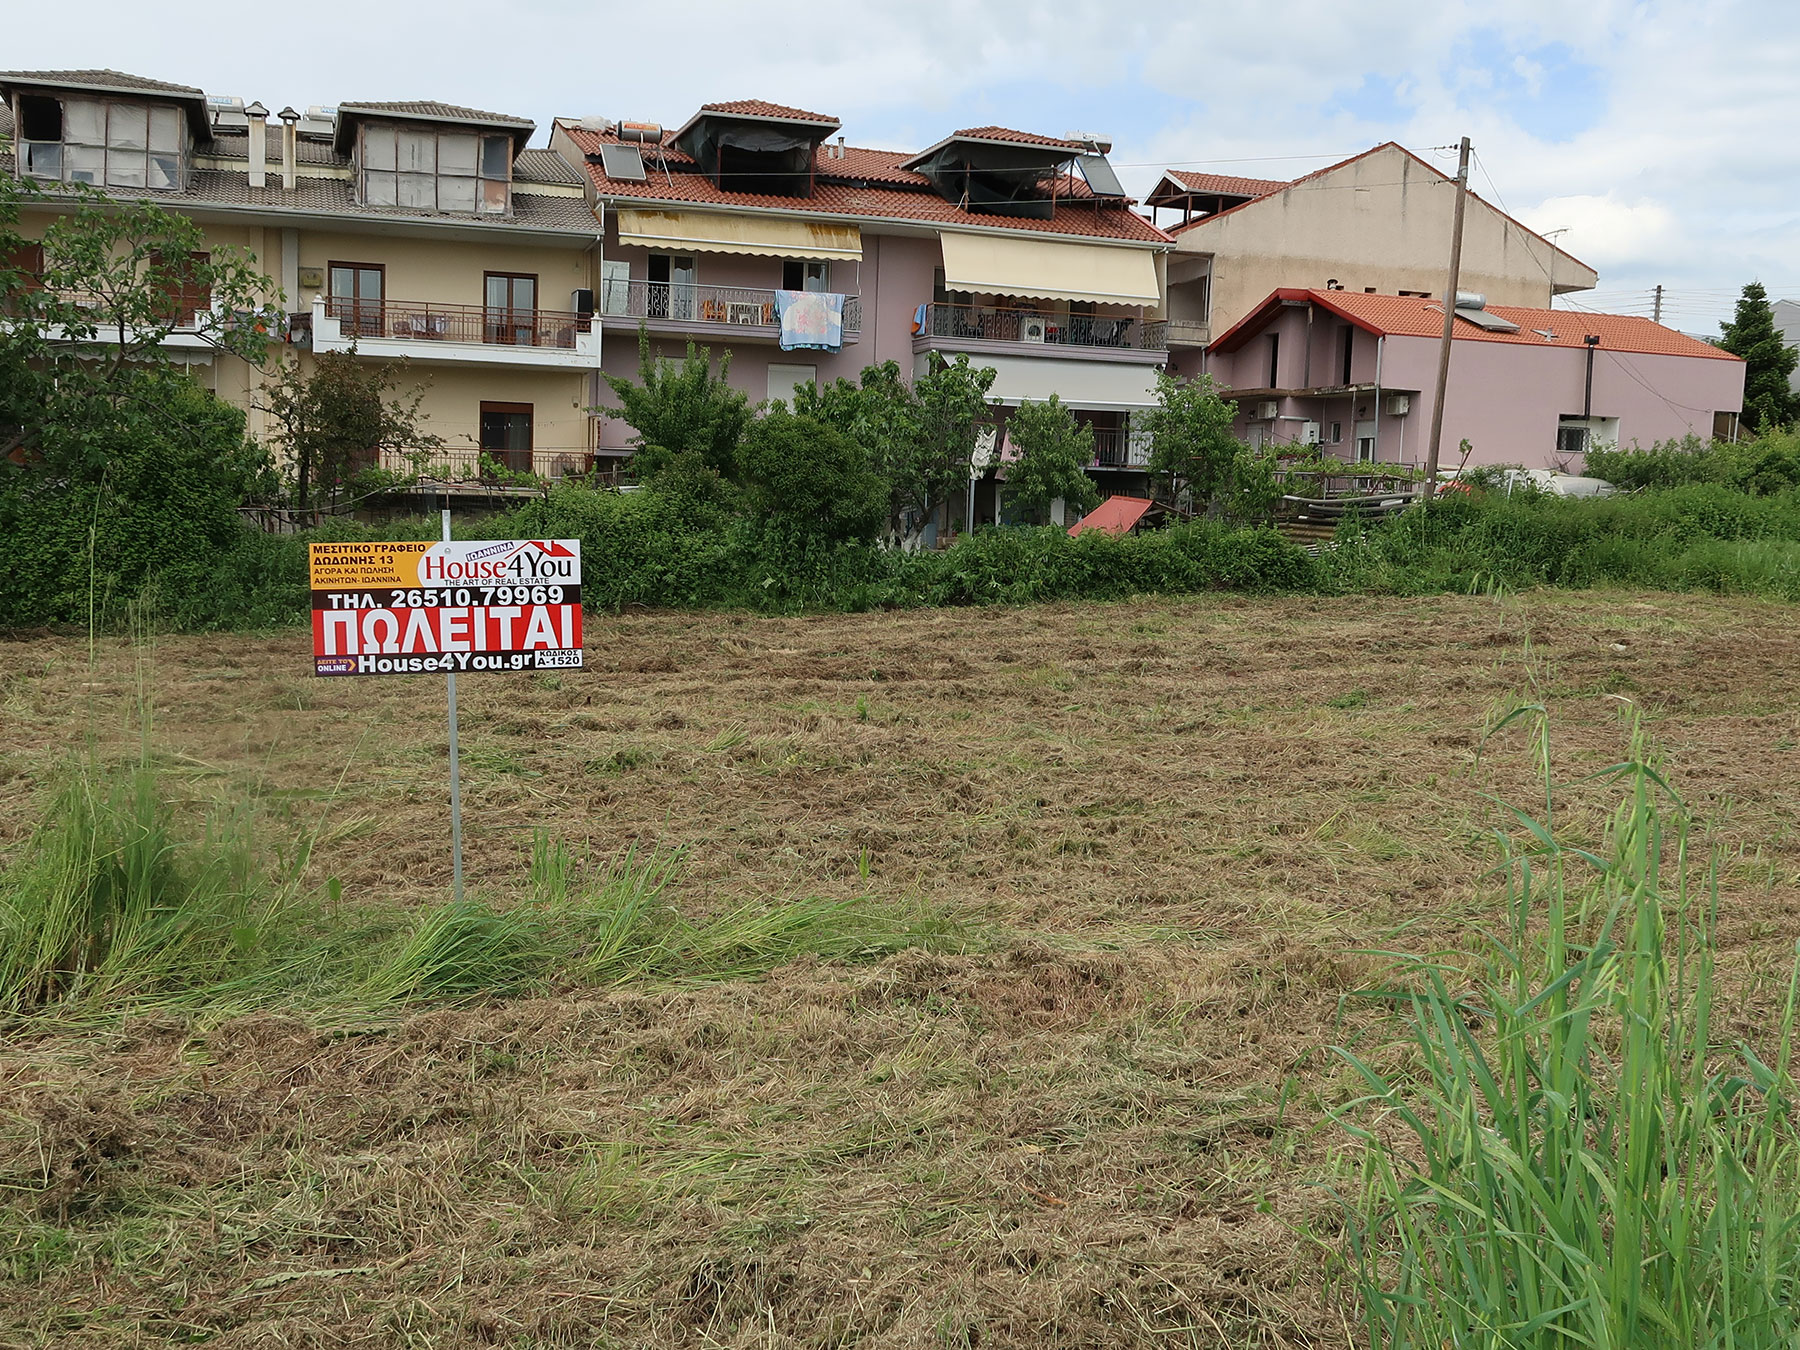 Flat plot of 926 sq.m. for sale. with S.D. 0.6 on Papadopoulou Street in Anatoli Ioannina